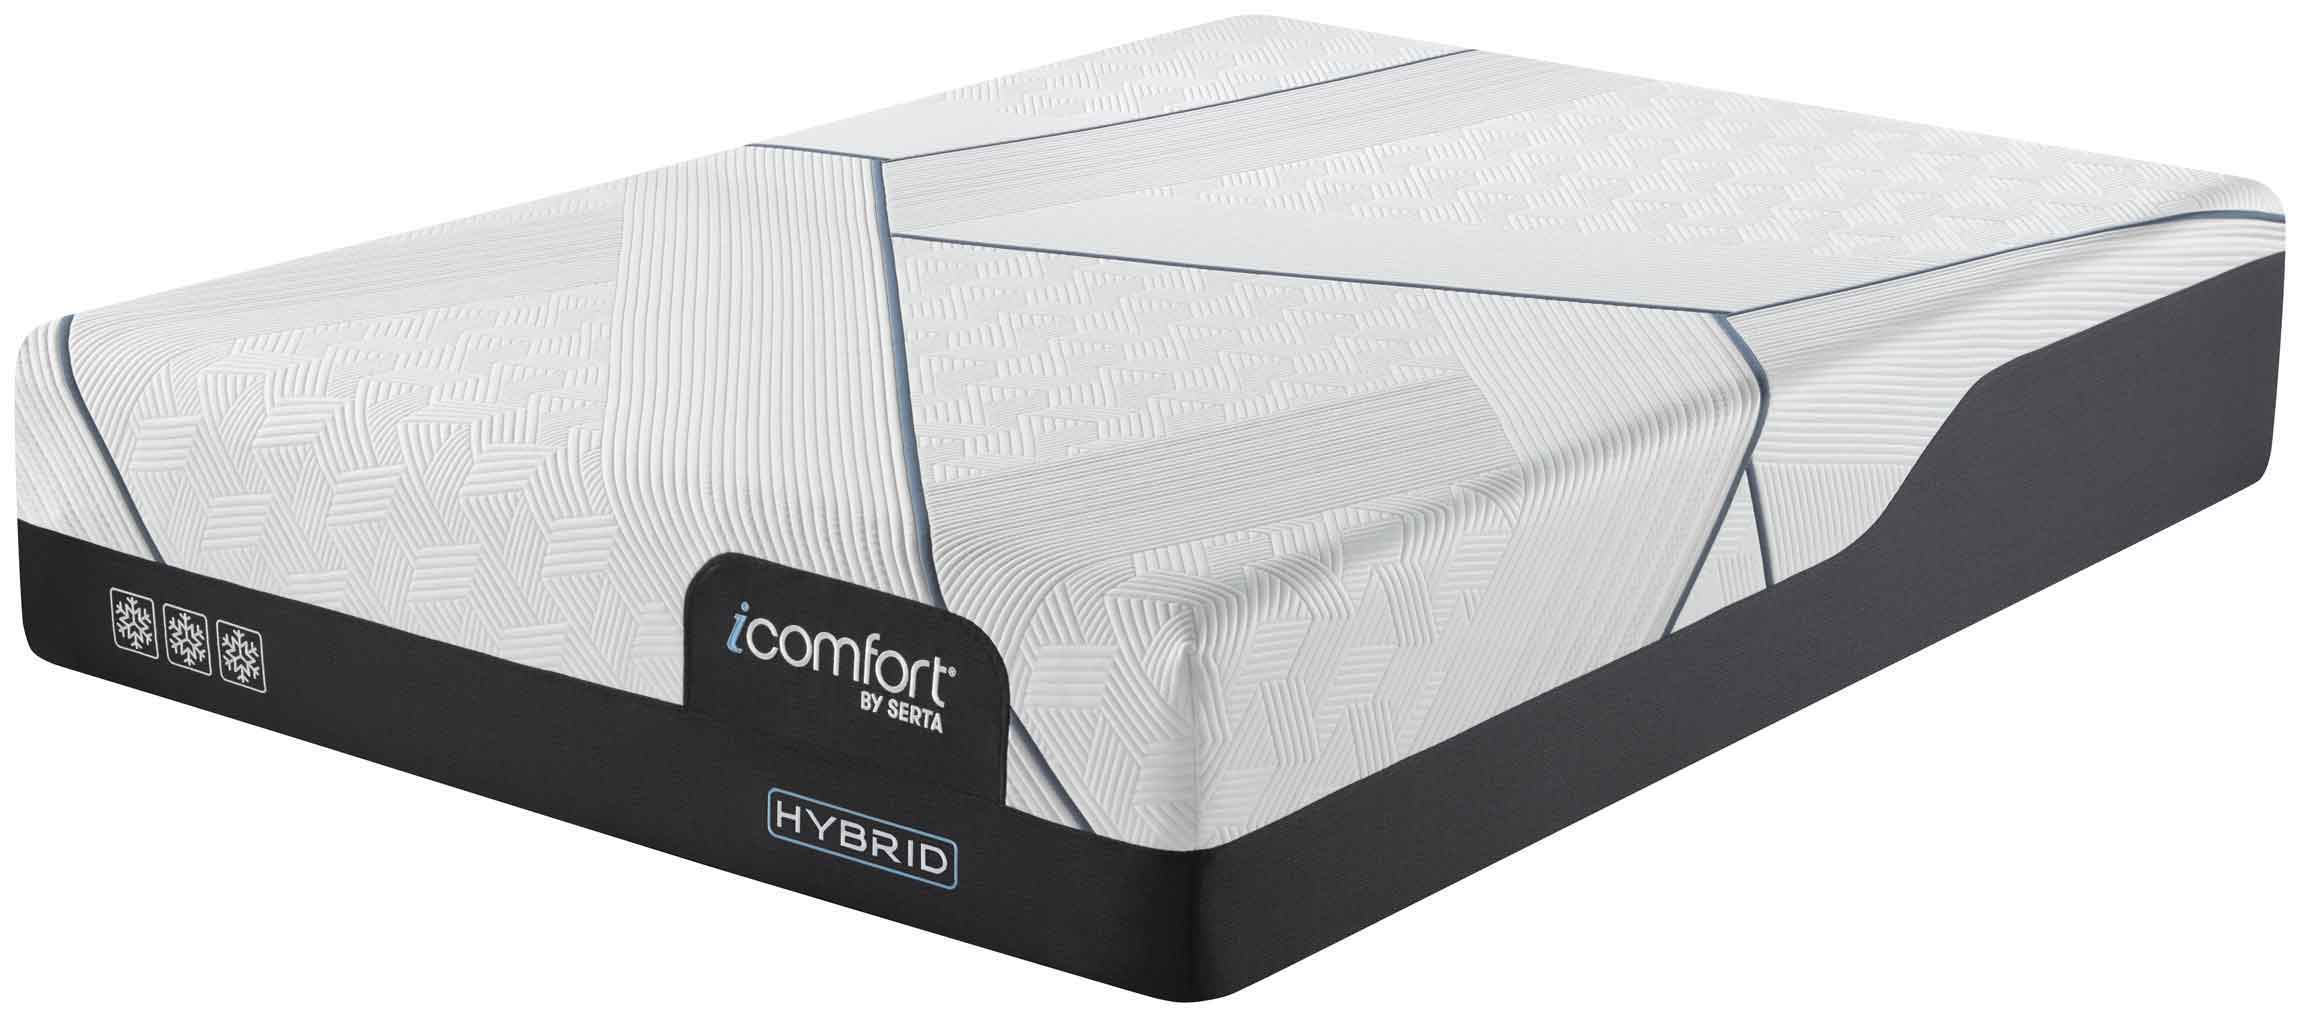 What Are The Pros & Cons Of Hybrid Mattresses For 2021?